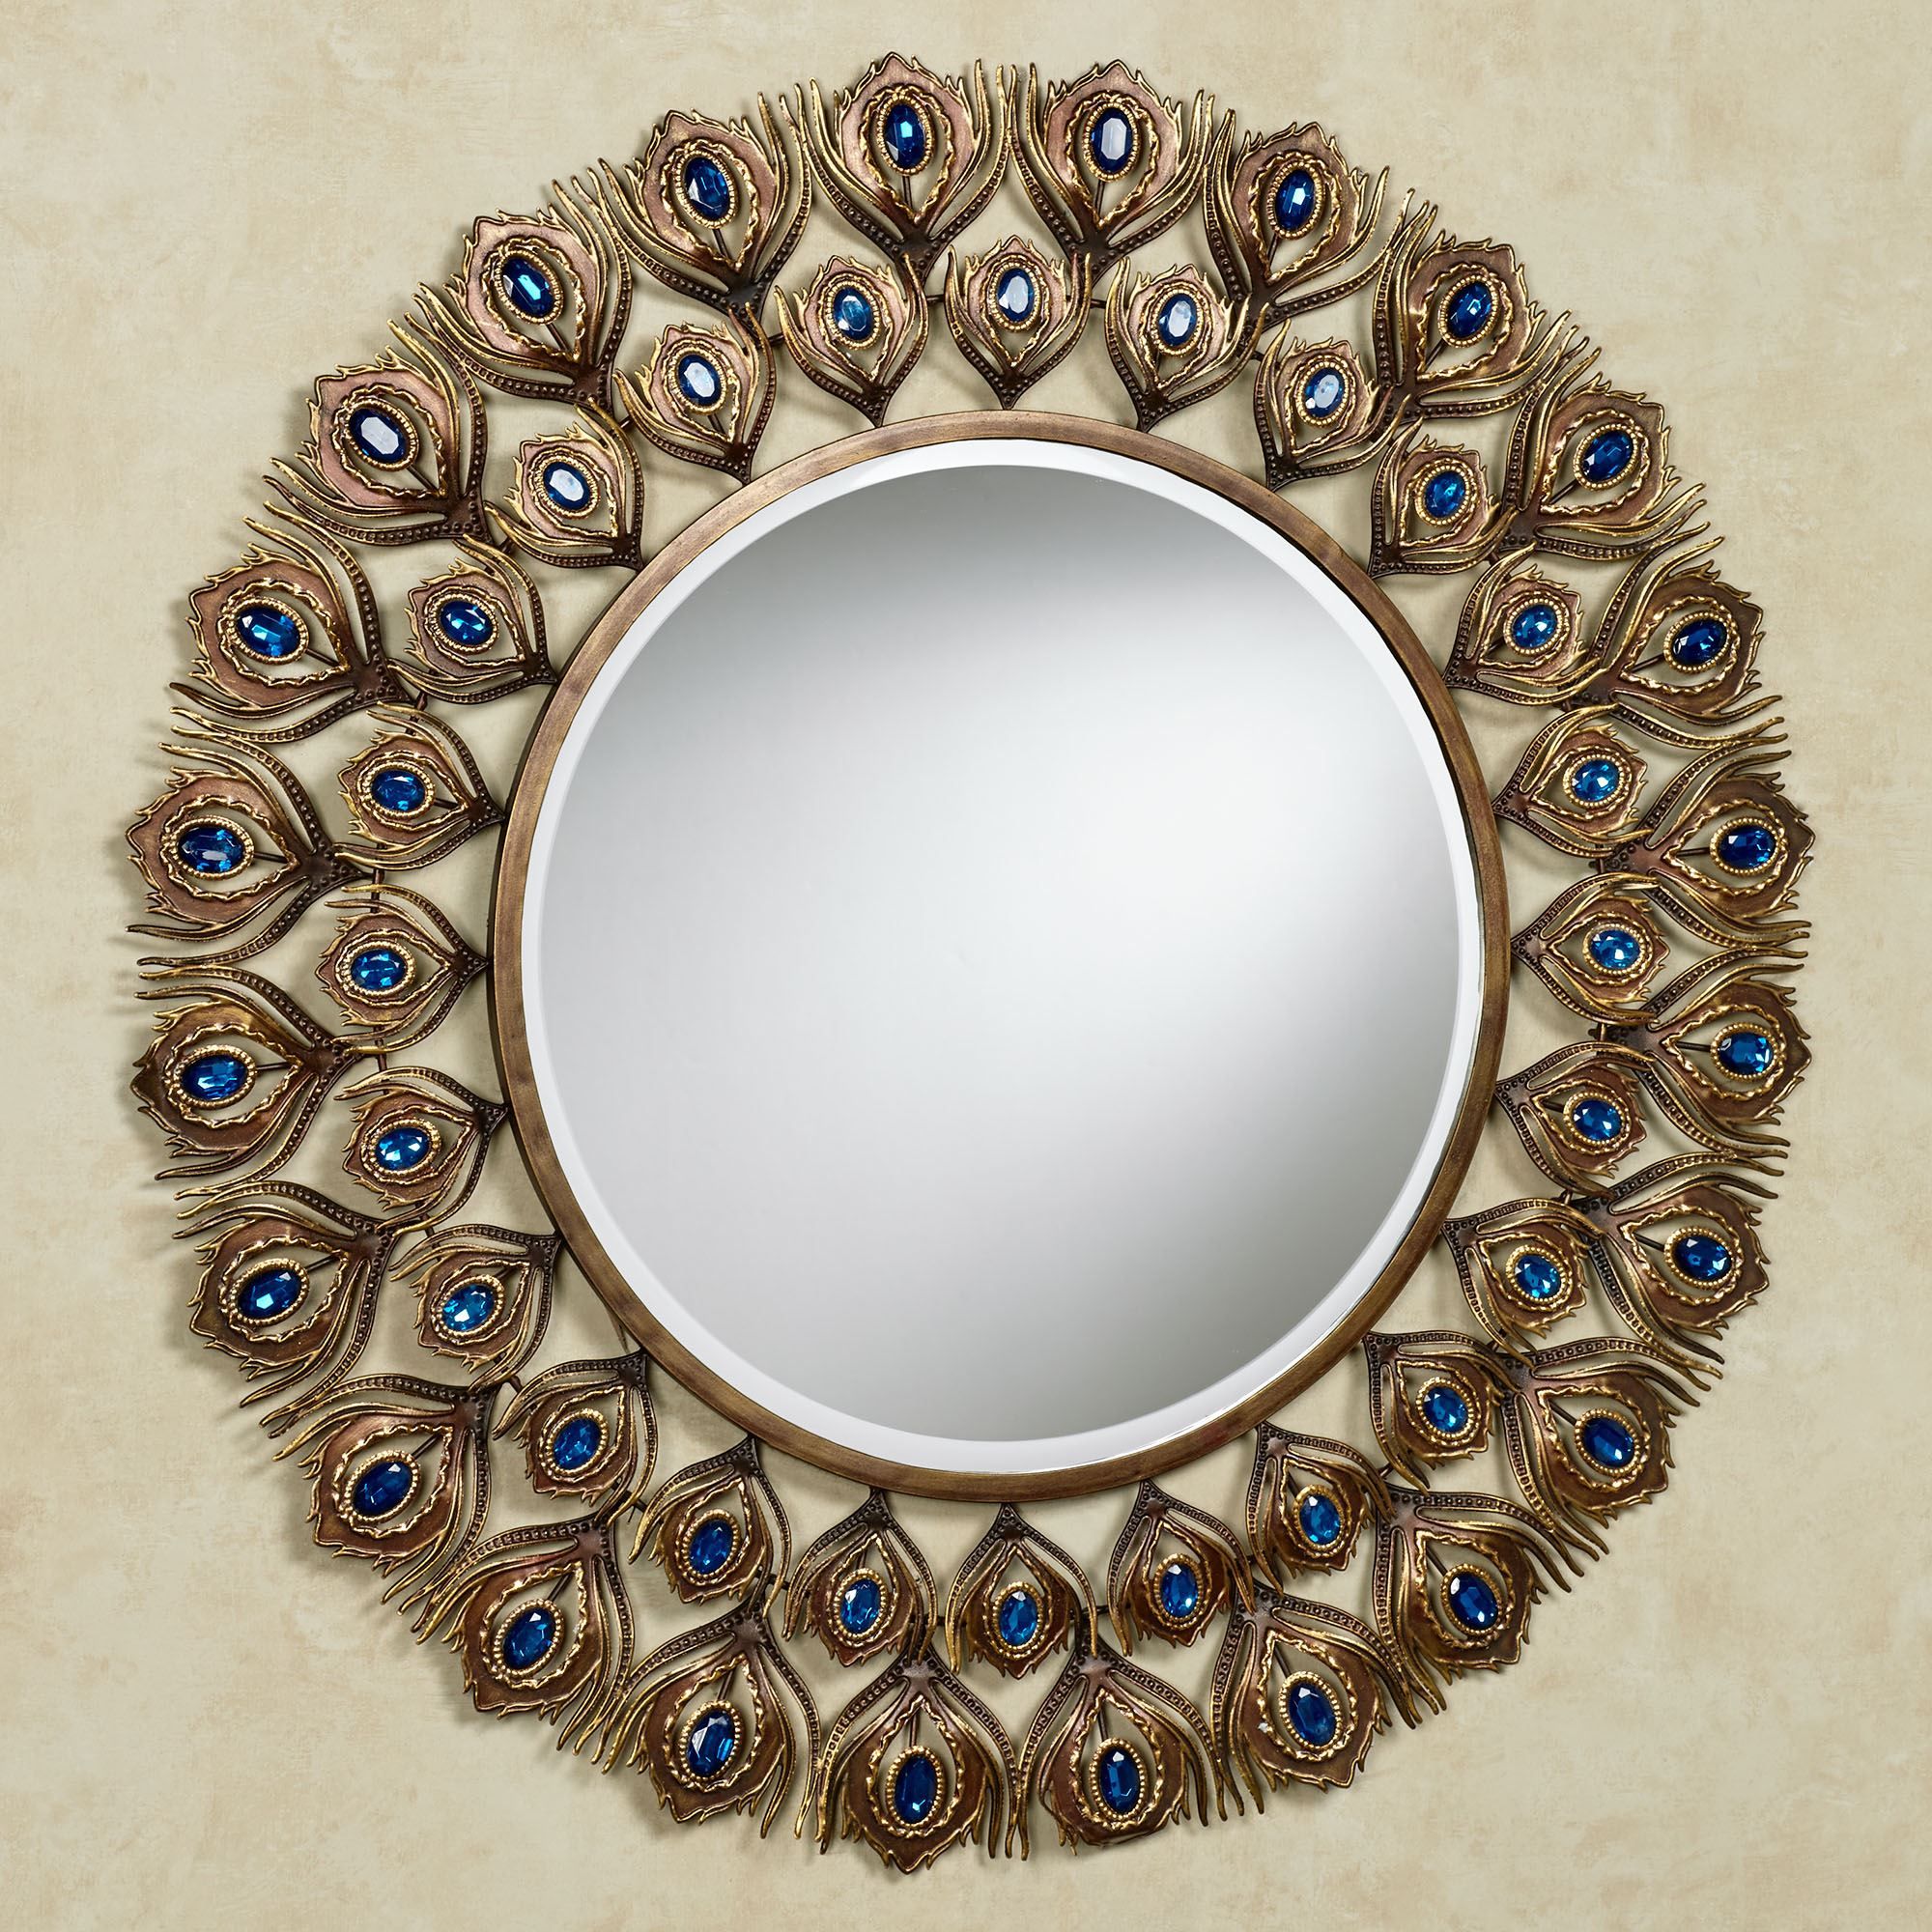 Royal Peacock Jeweled Round Wall Mirror In Round Scalloped Wall Mirrors (View 6 of 15)